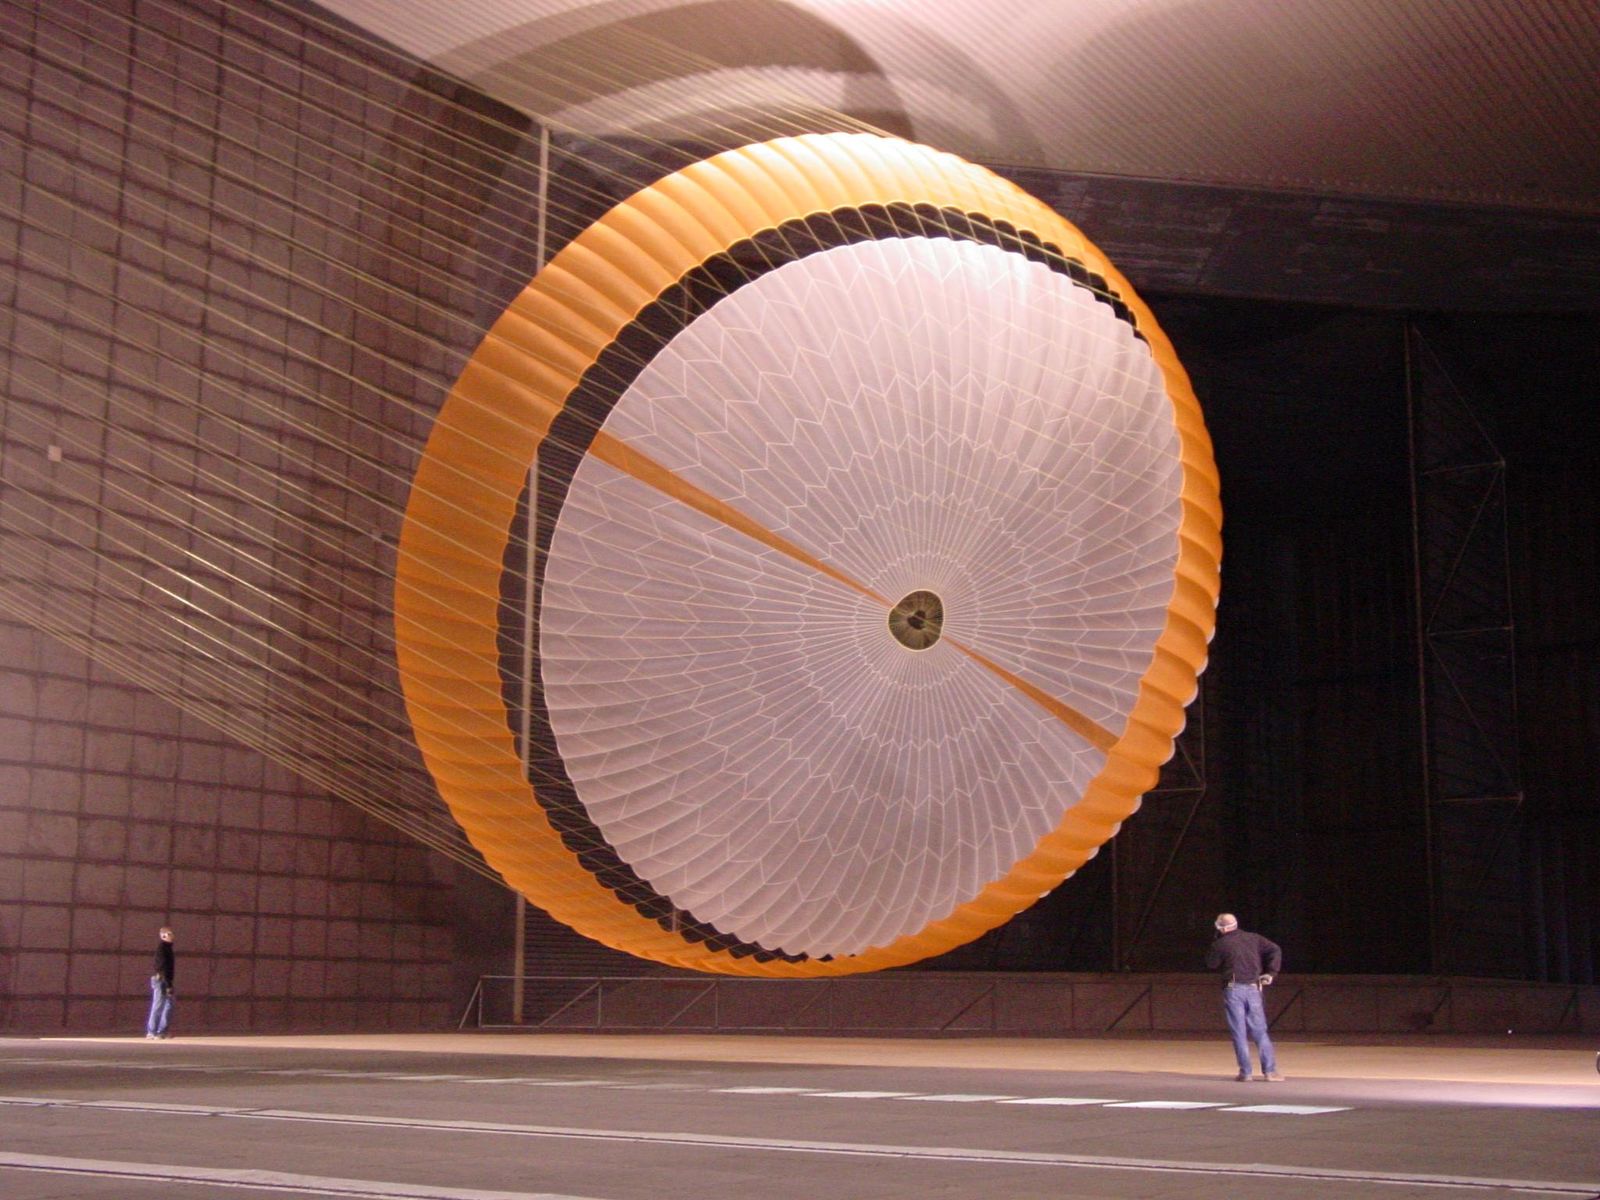 A Mars rover parachute inflated inside the world's largest wind tunnel